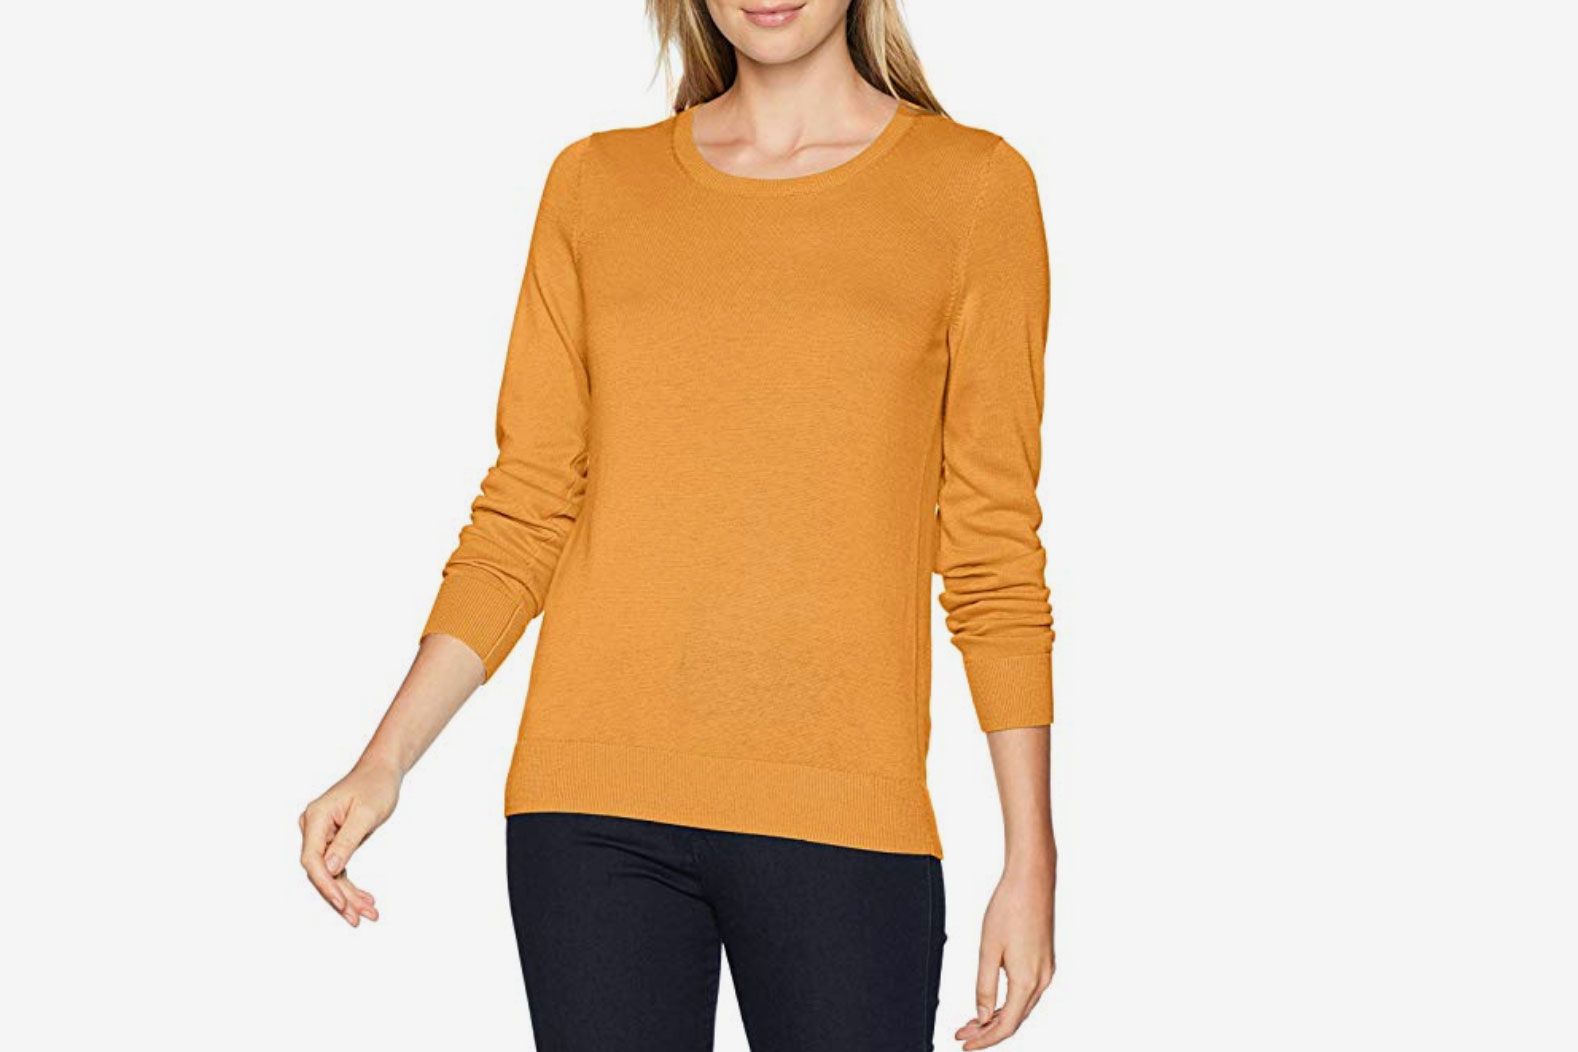 21 Best Lightweight Sweaters for Layering